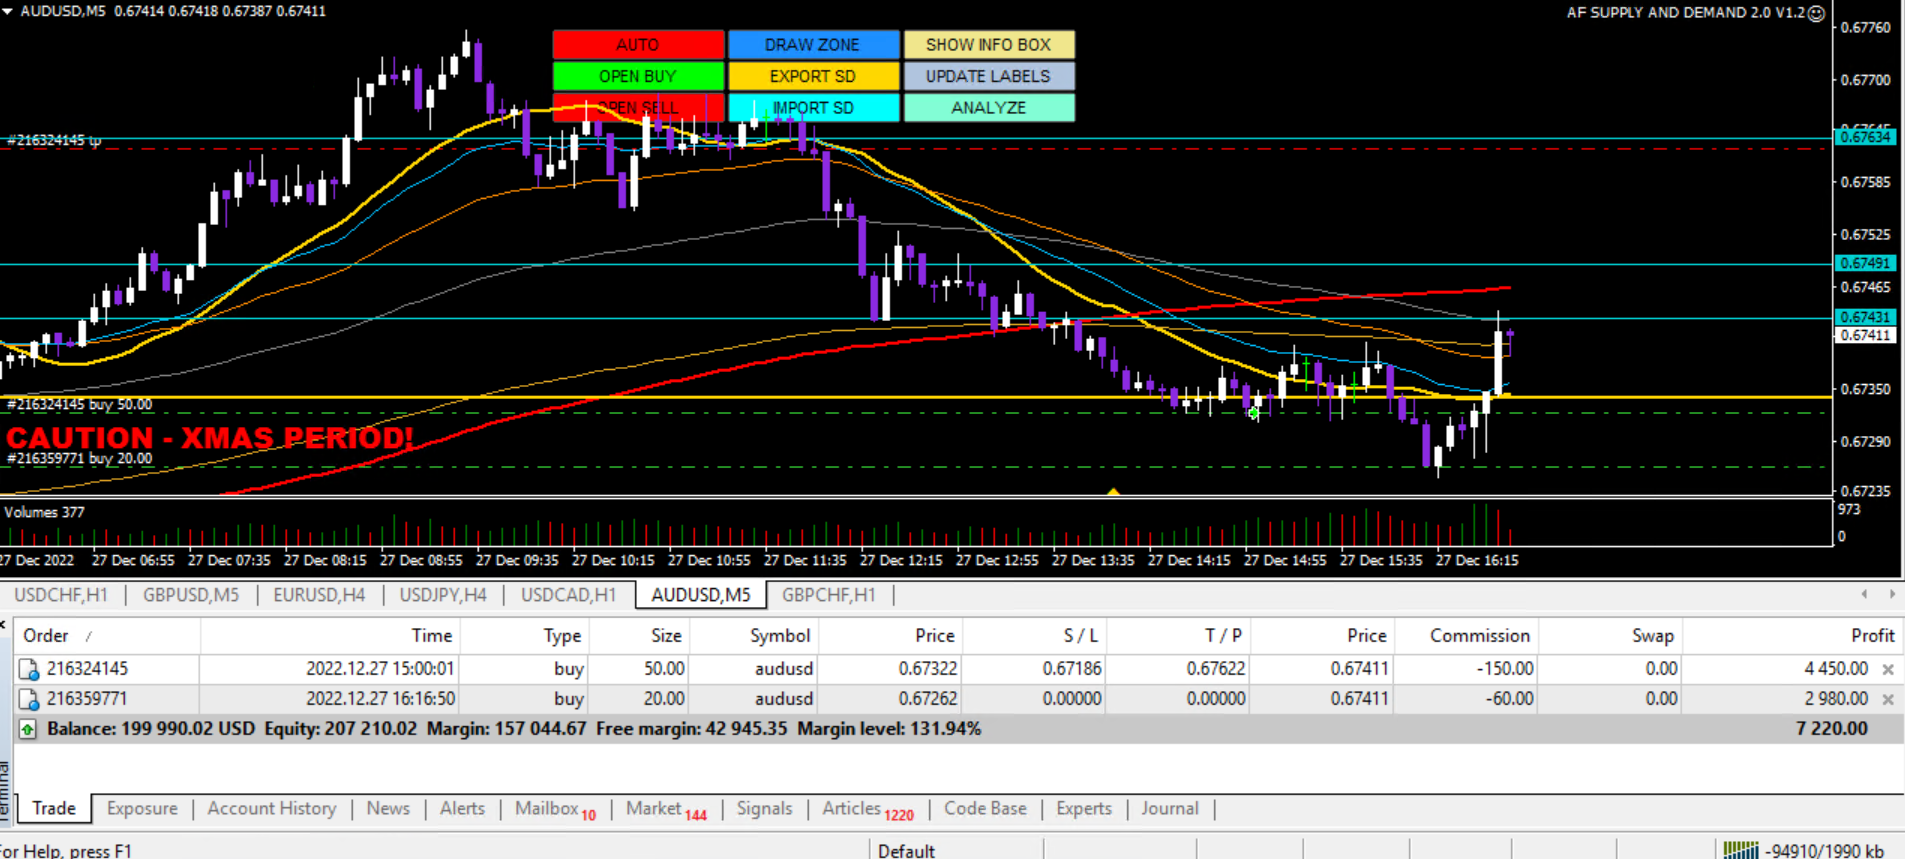 AUDUSD H1 BUY AFTER WITH 2ND HEDGE BUY 7500 PROFIT